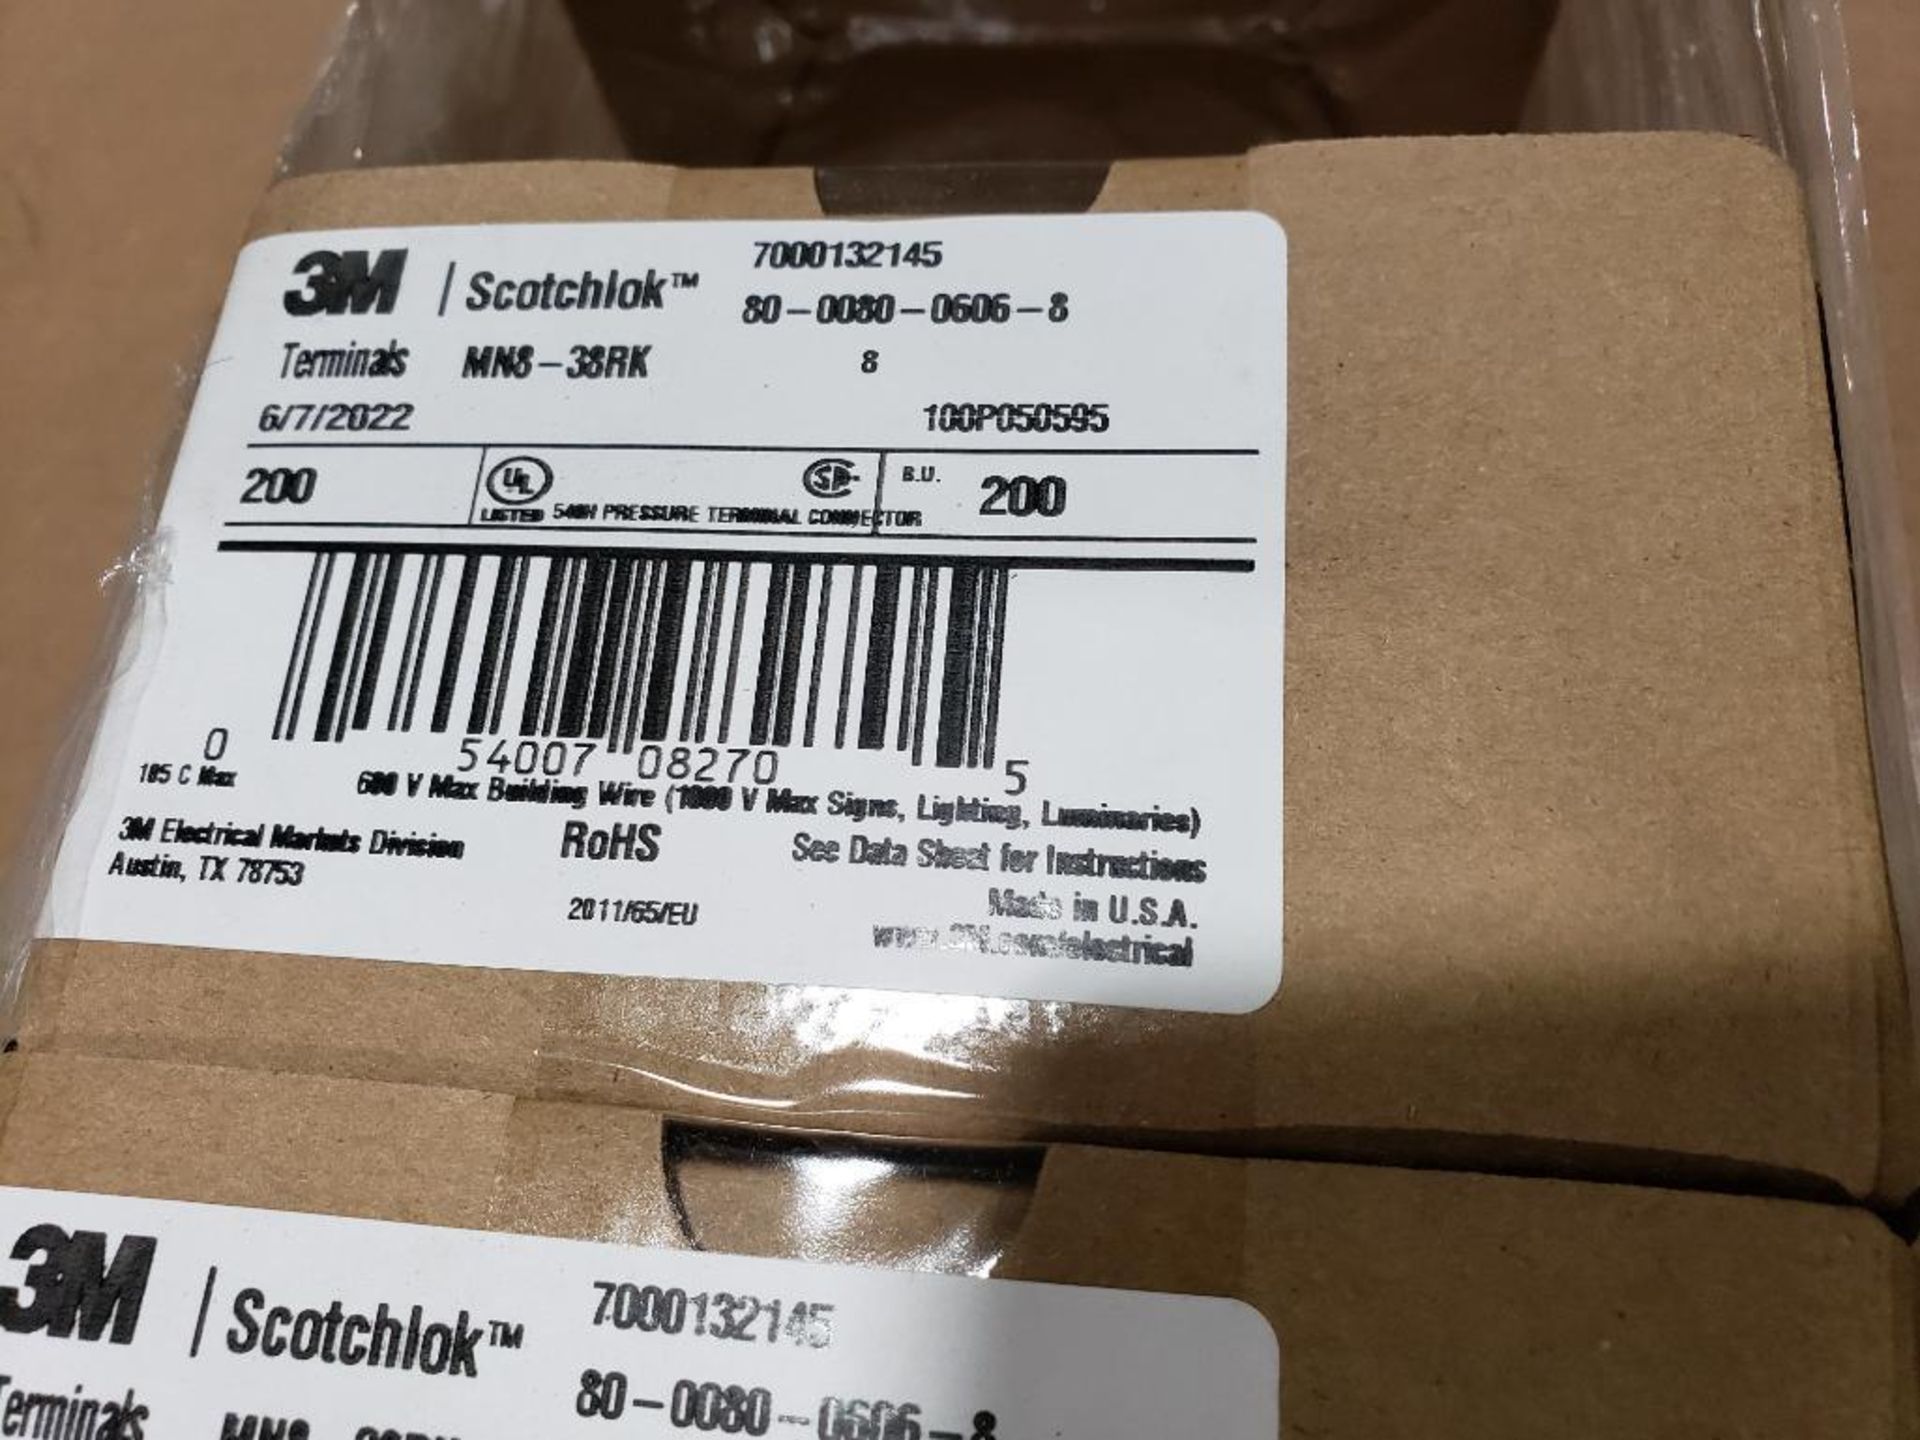 Qty 1000 - 3M Scotchlok wire connector. Part number MN8-38RK. (5 boxes of 200) - Image 5 of 7